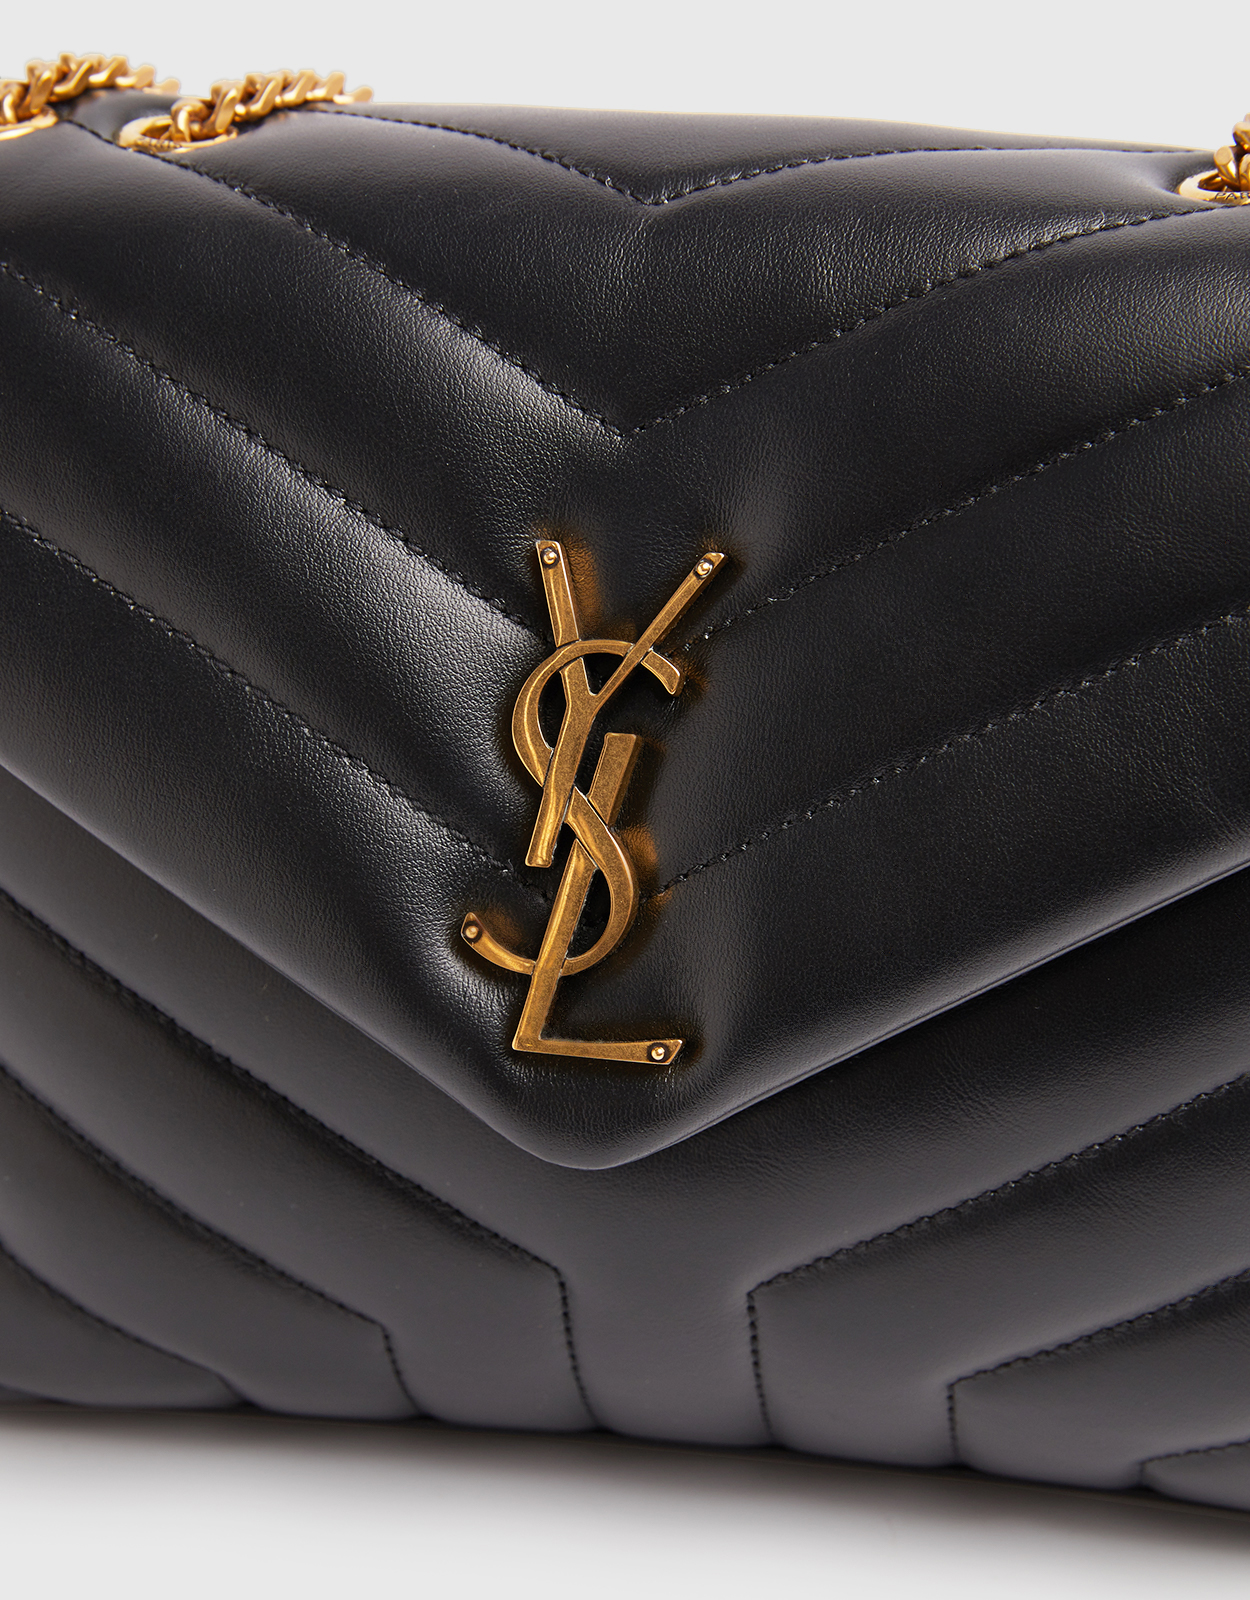 FIRST IMPRESSION OF YSL MINI LOULOU/ WHAT FITS/ MINI LOULOU VS TOY LOULOU 